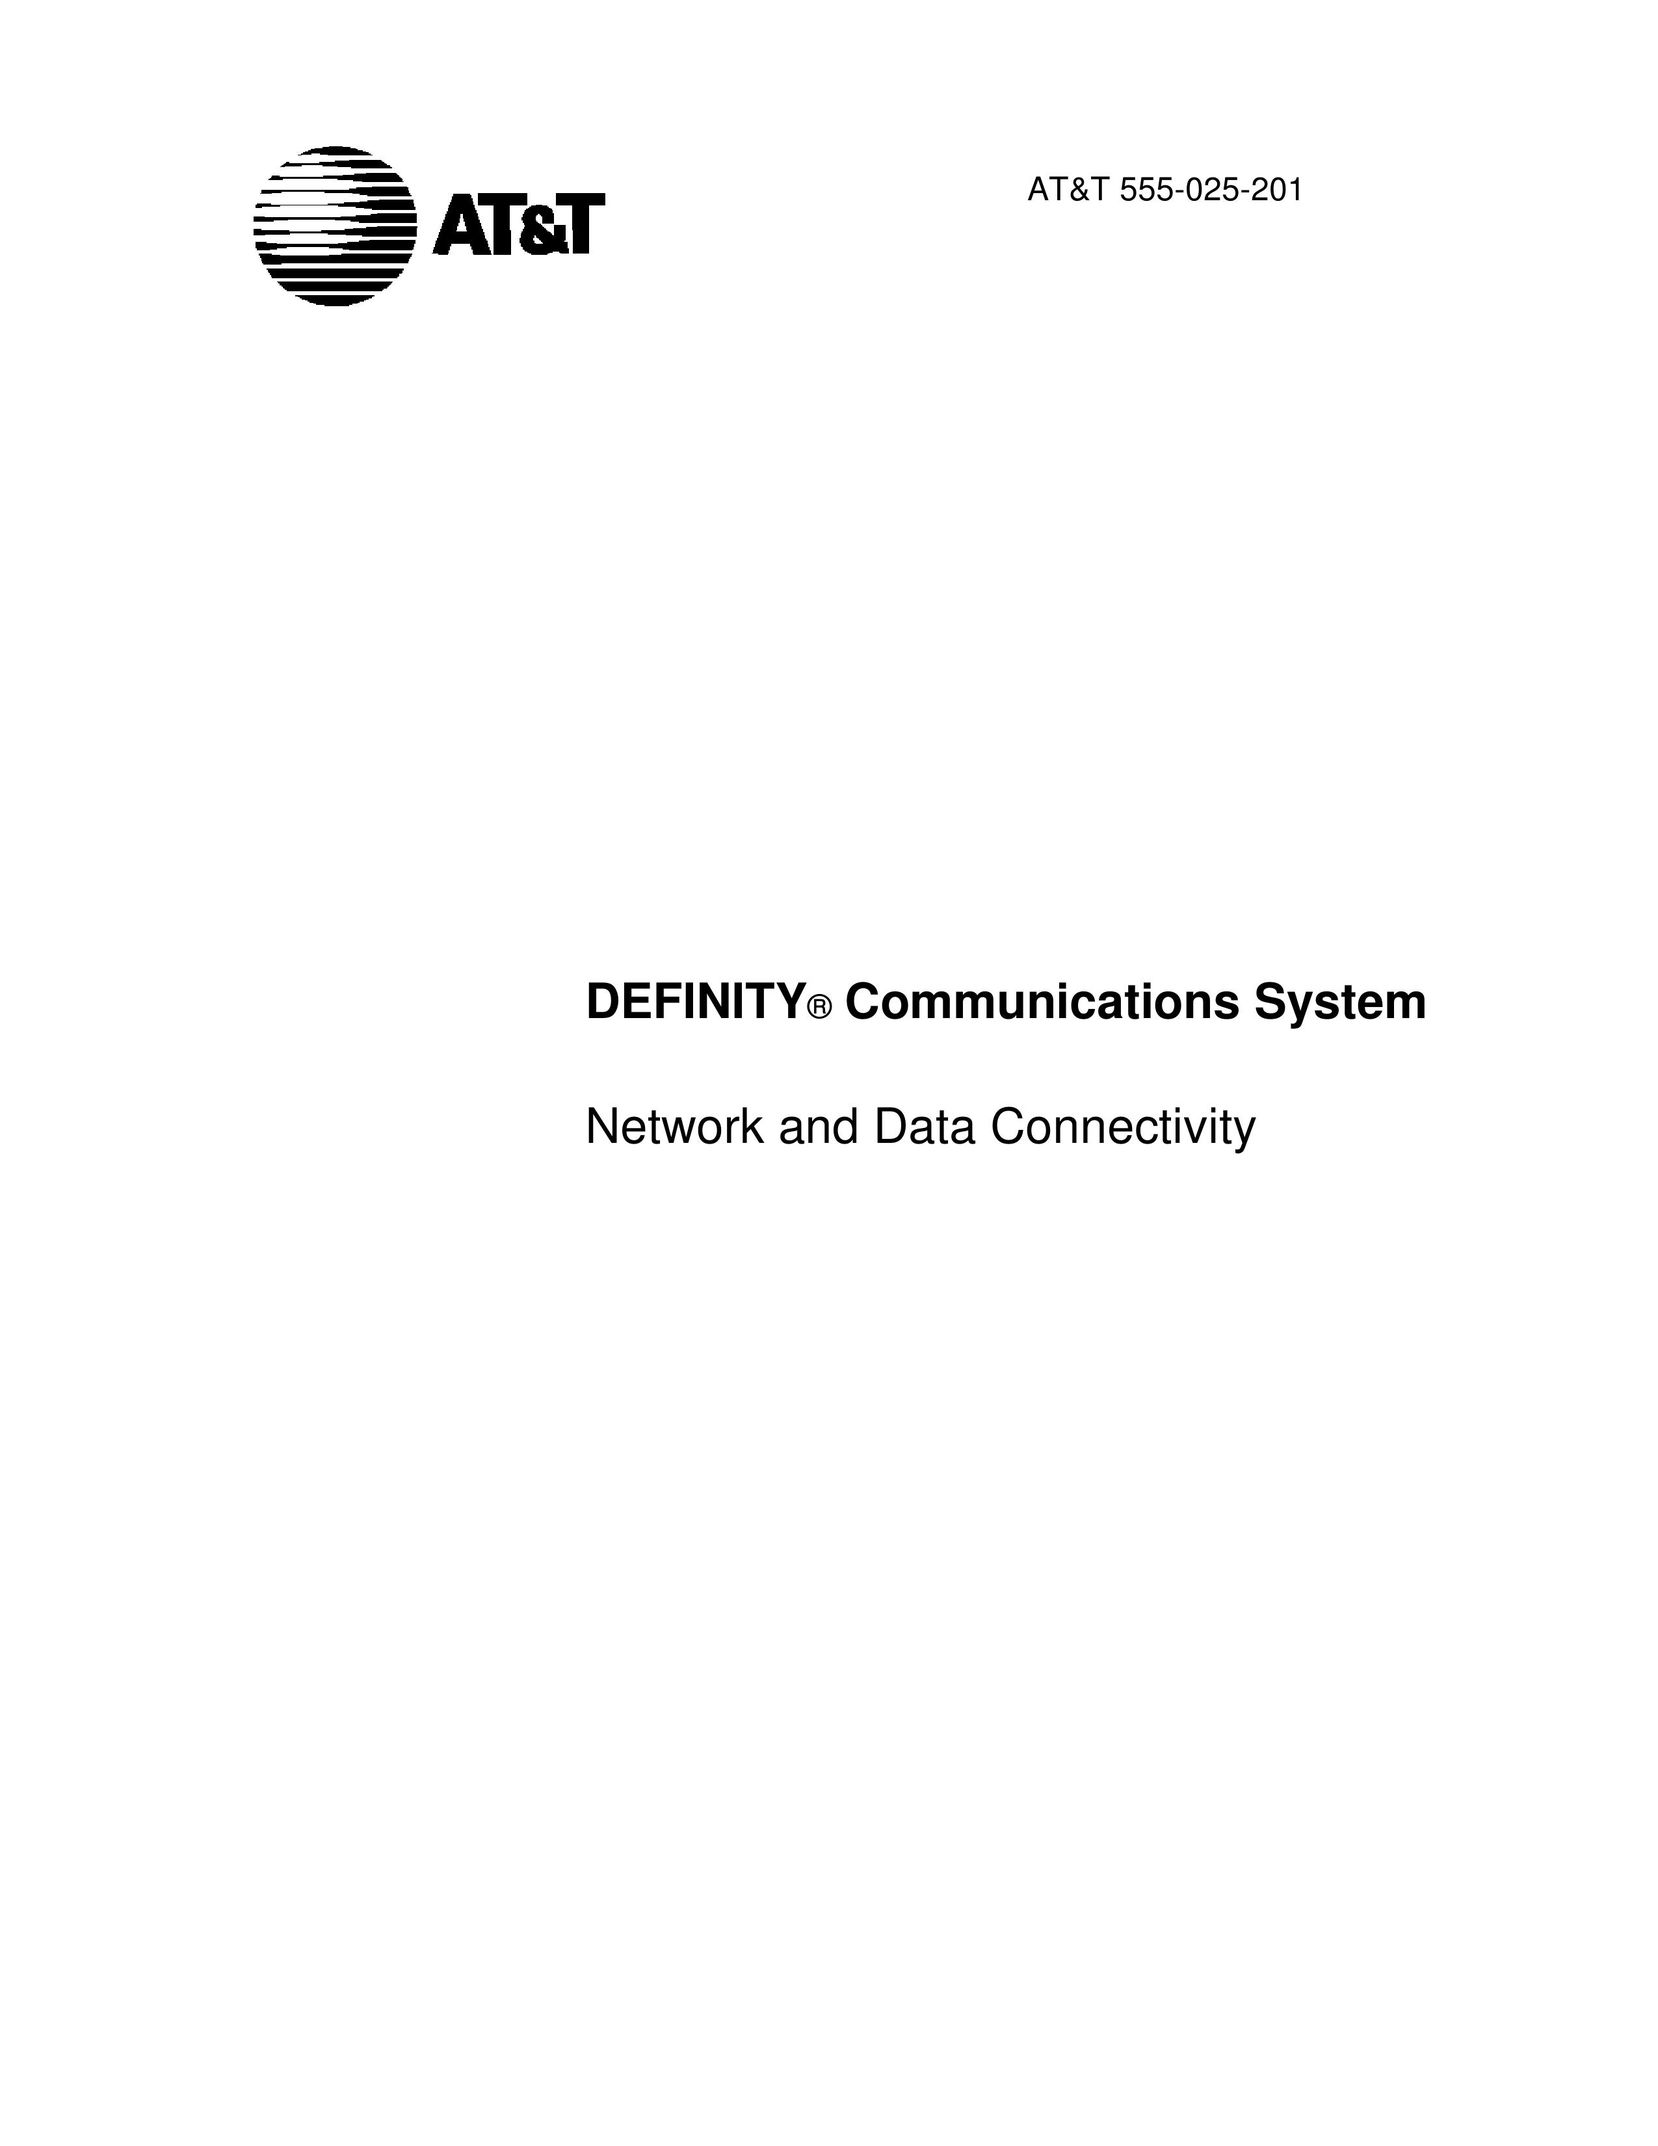 AT&T 7400 series Network Router User Manual